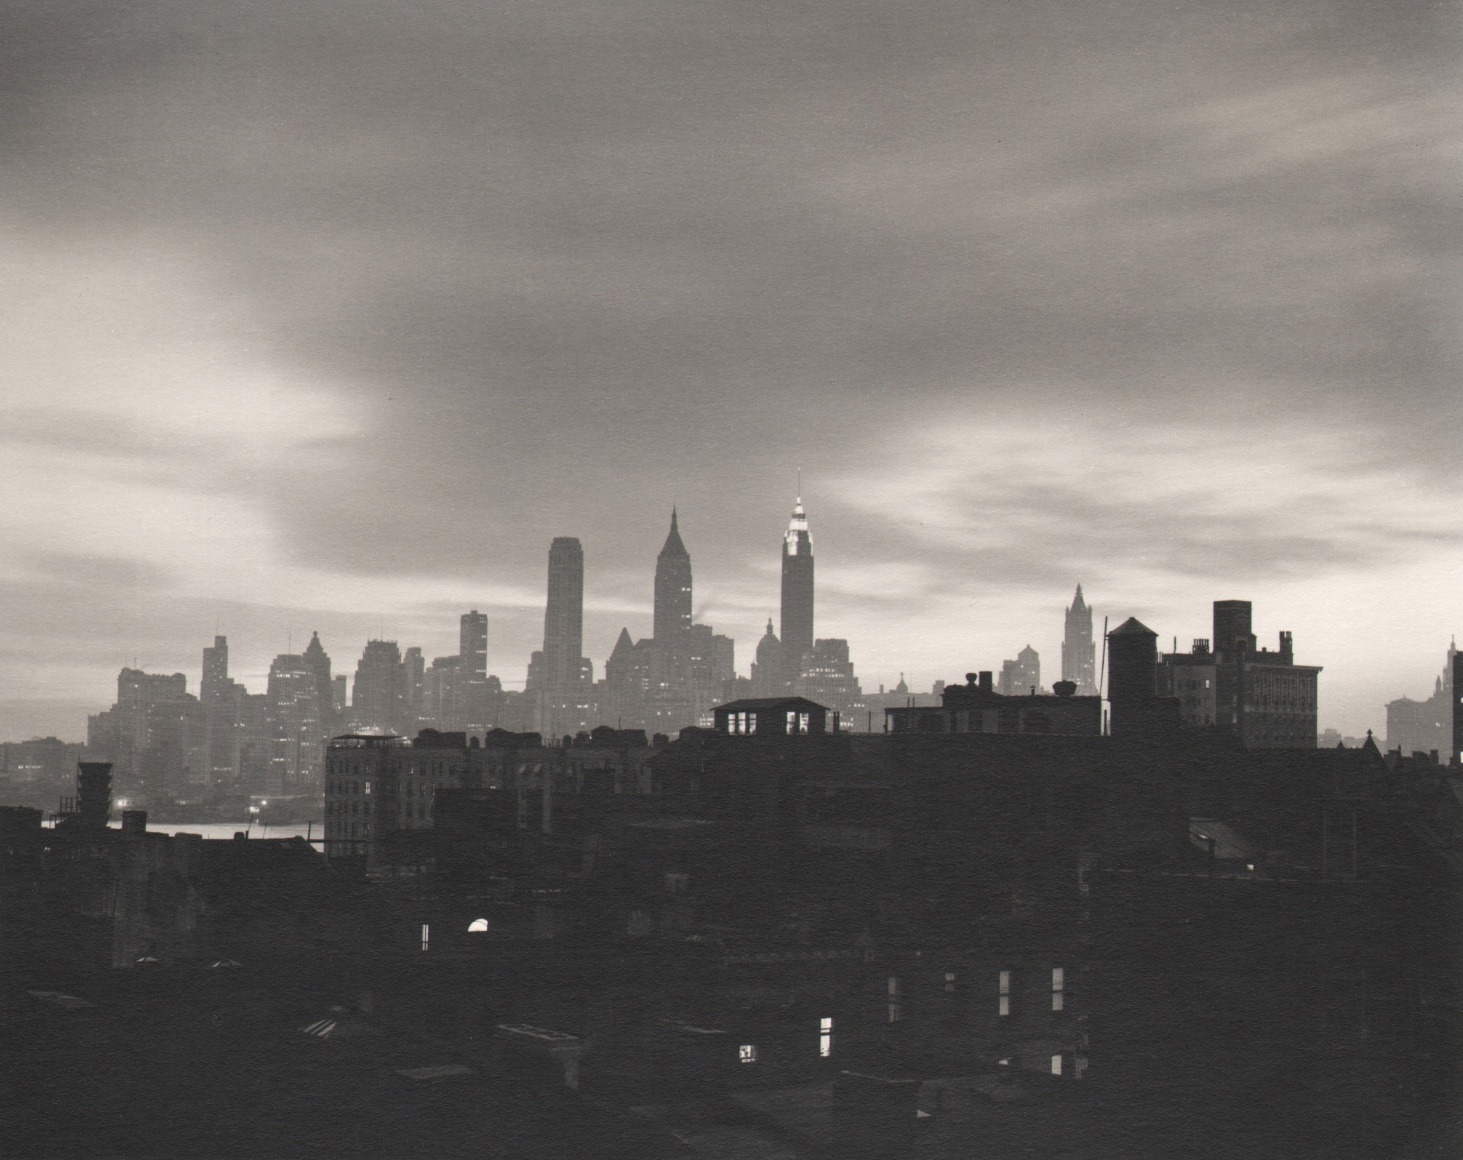 35. John C. Hatlem, New York City Skyline, ​c. 1935. Dark, mostly silhouetted view of the city from across a river. Dark buildings in the foreground. The Empire State is in the center background against a cloudy sky.